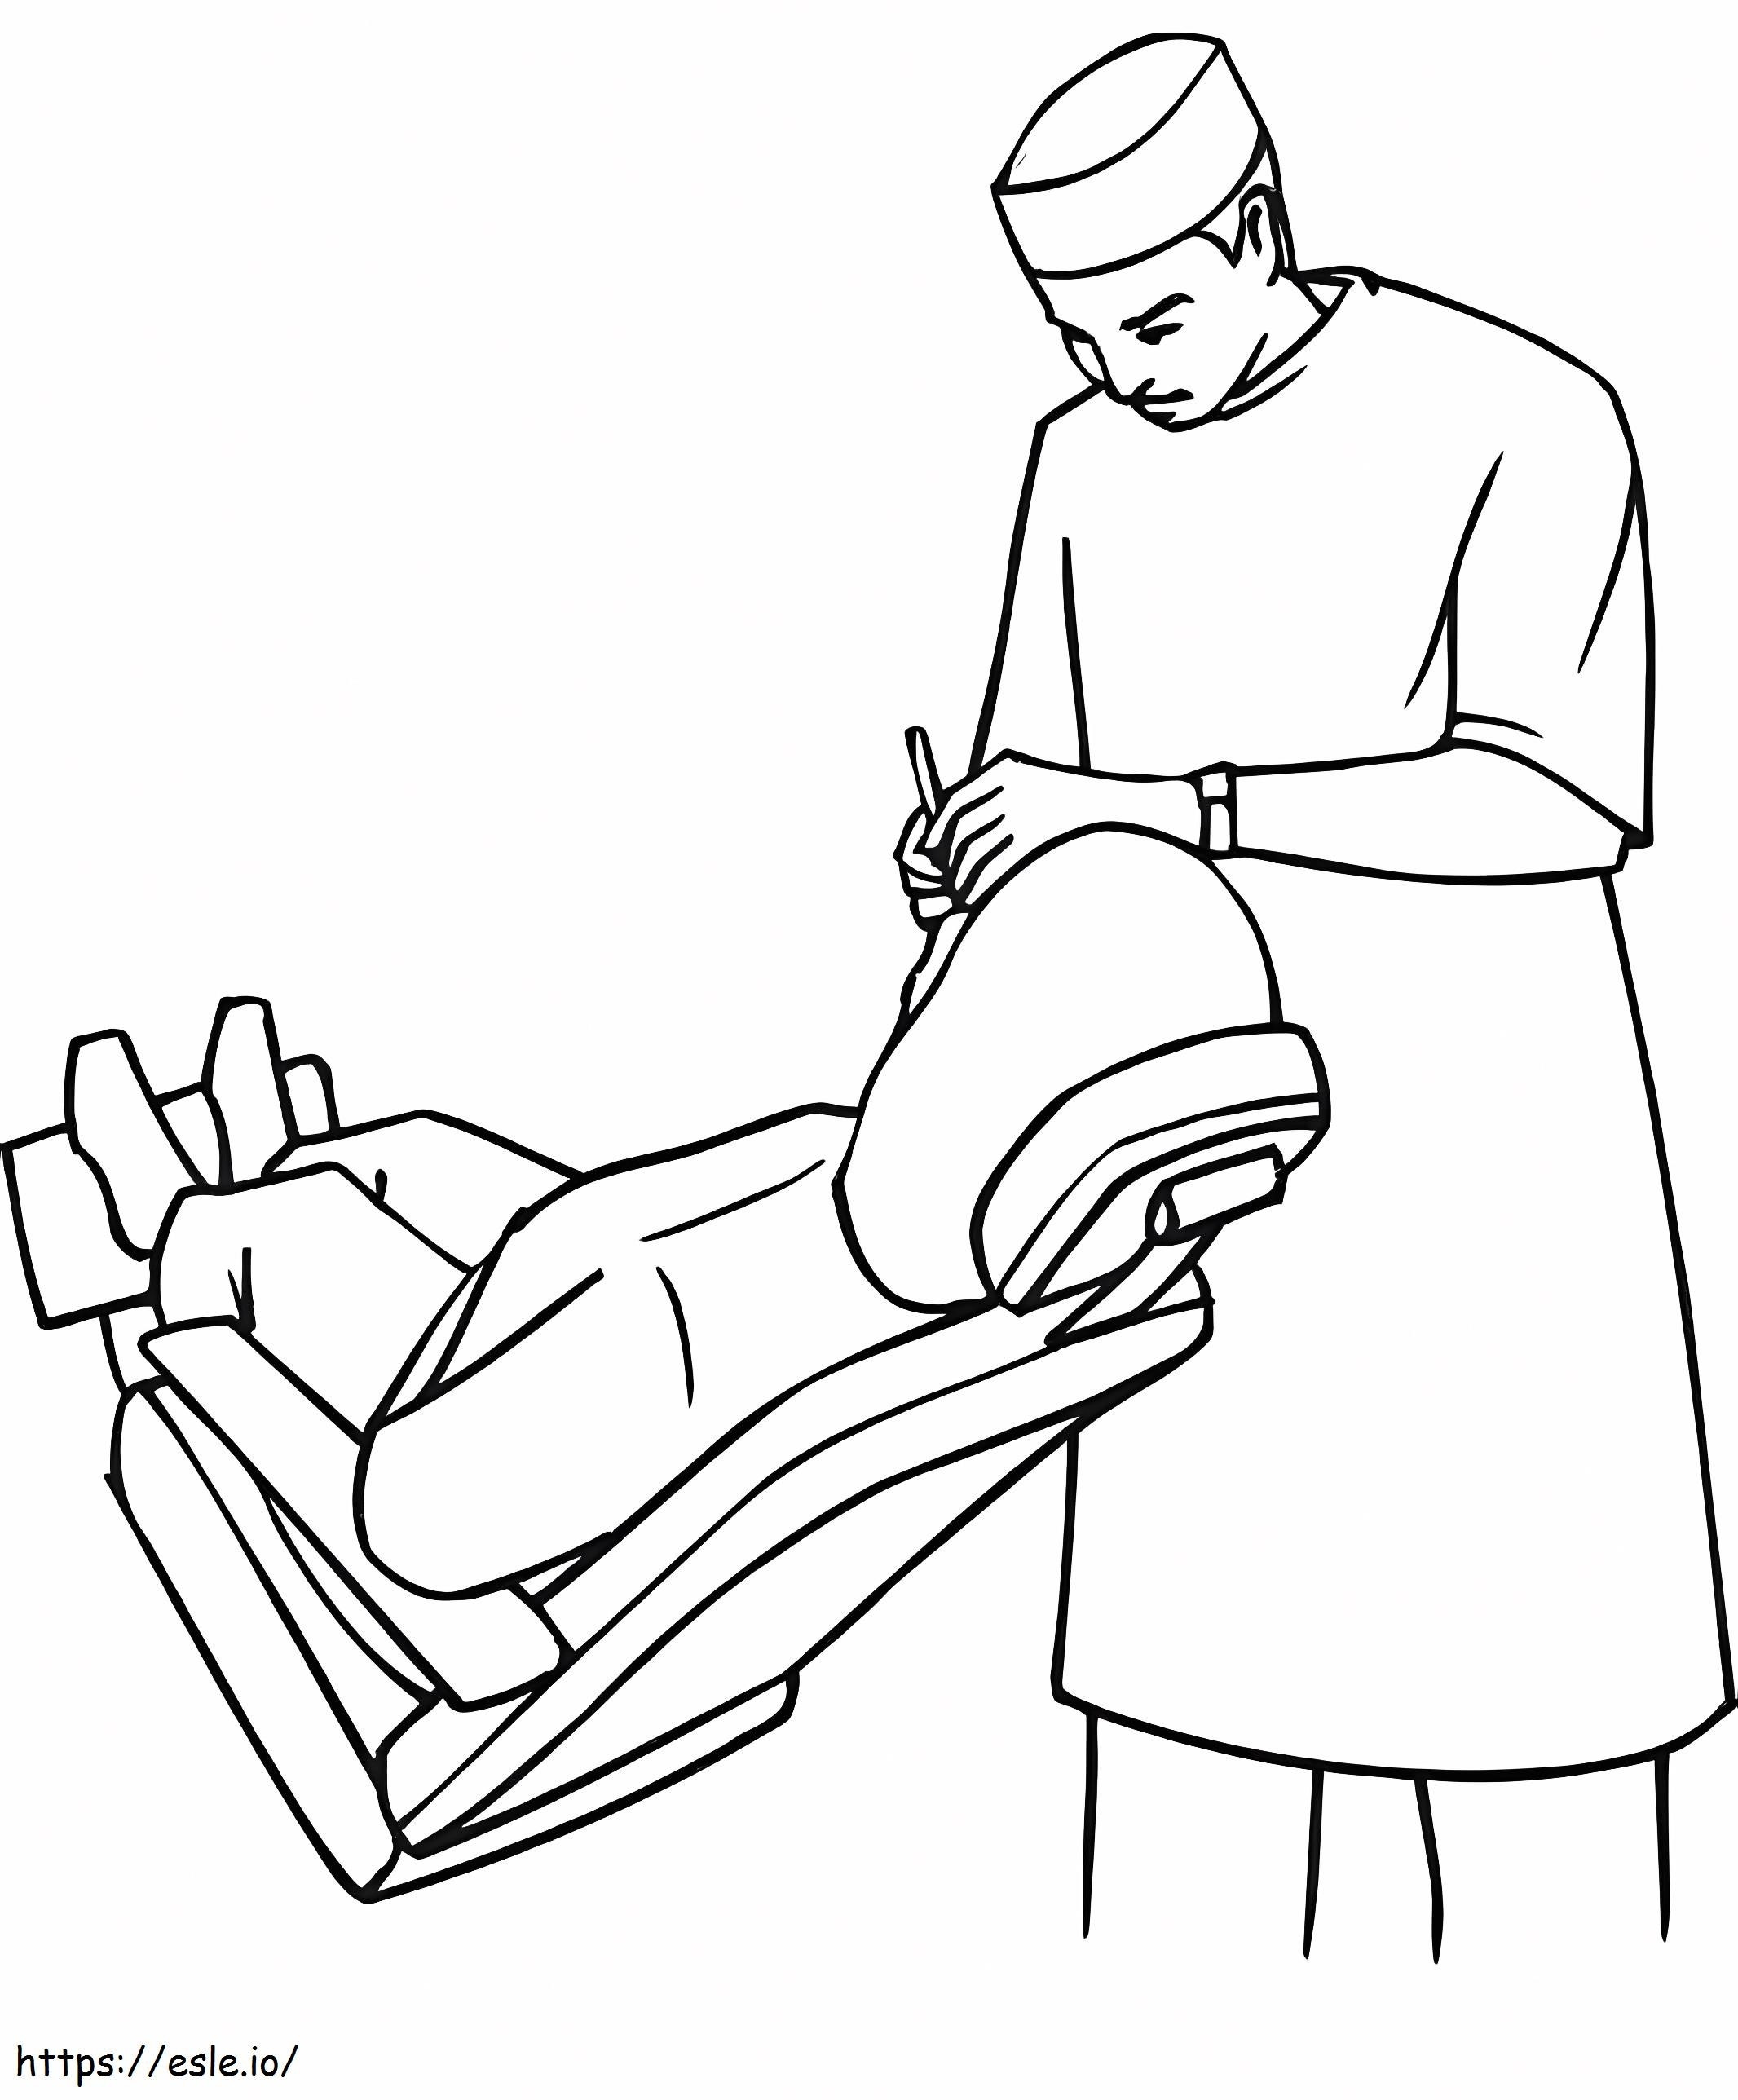 Dentist 4 coloring page